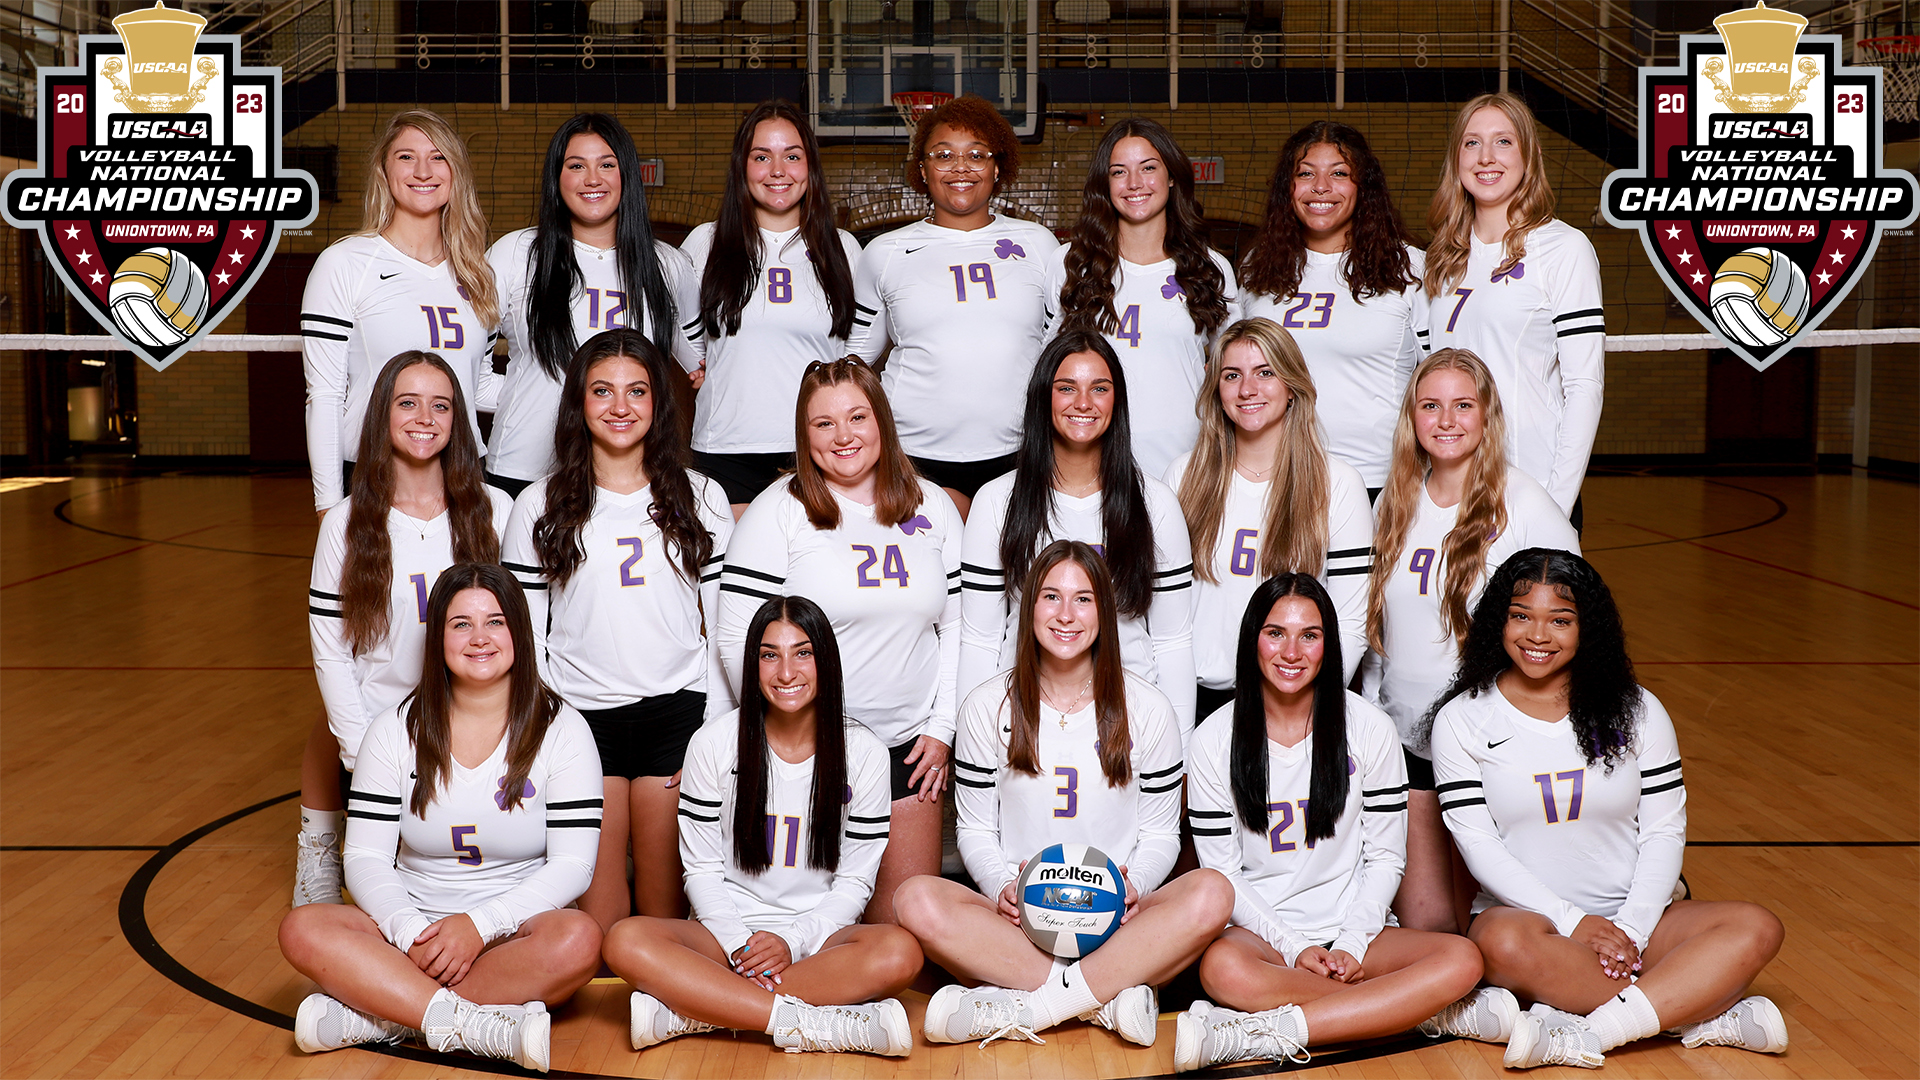 The 2023 women’s volleyball team. Photo by Robert Cifone.